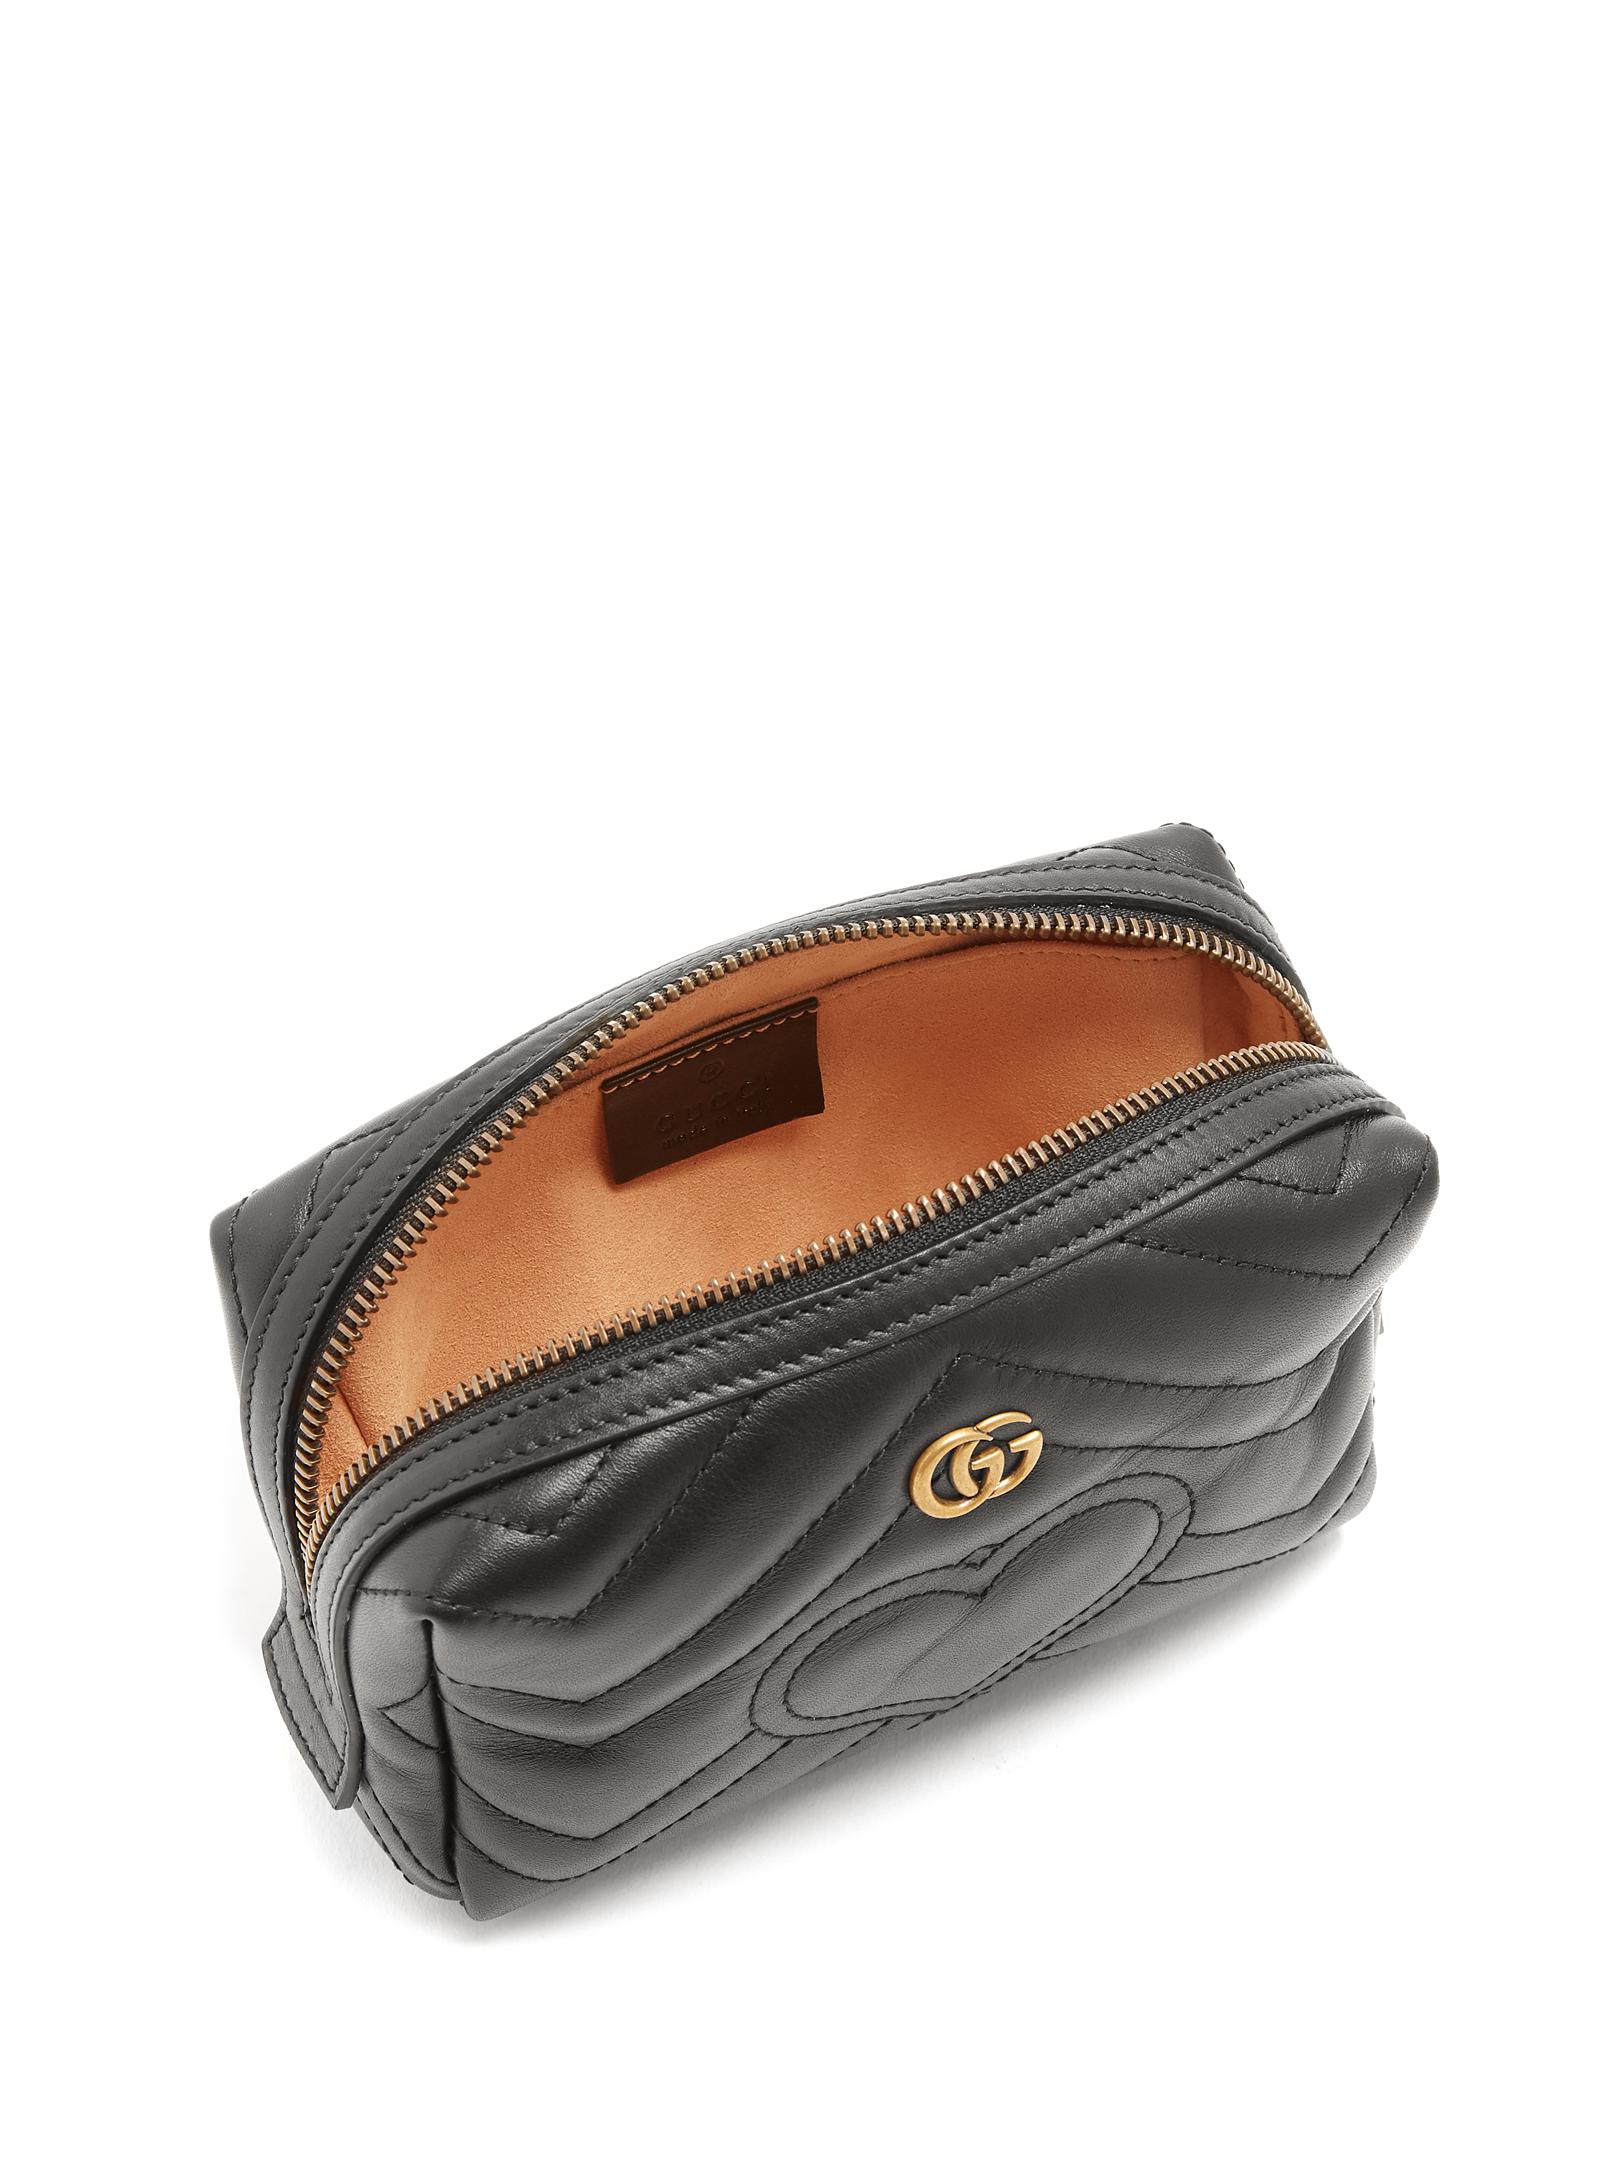 Gucci Gg Marmont Quilted-leather Make-up Bag in Black - Lyst